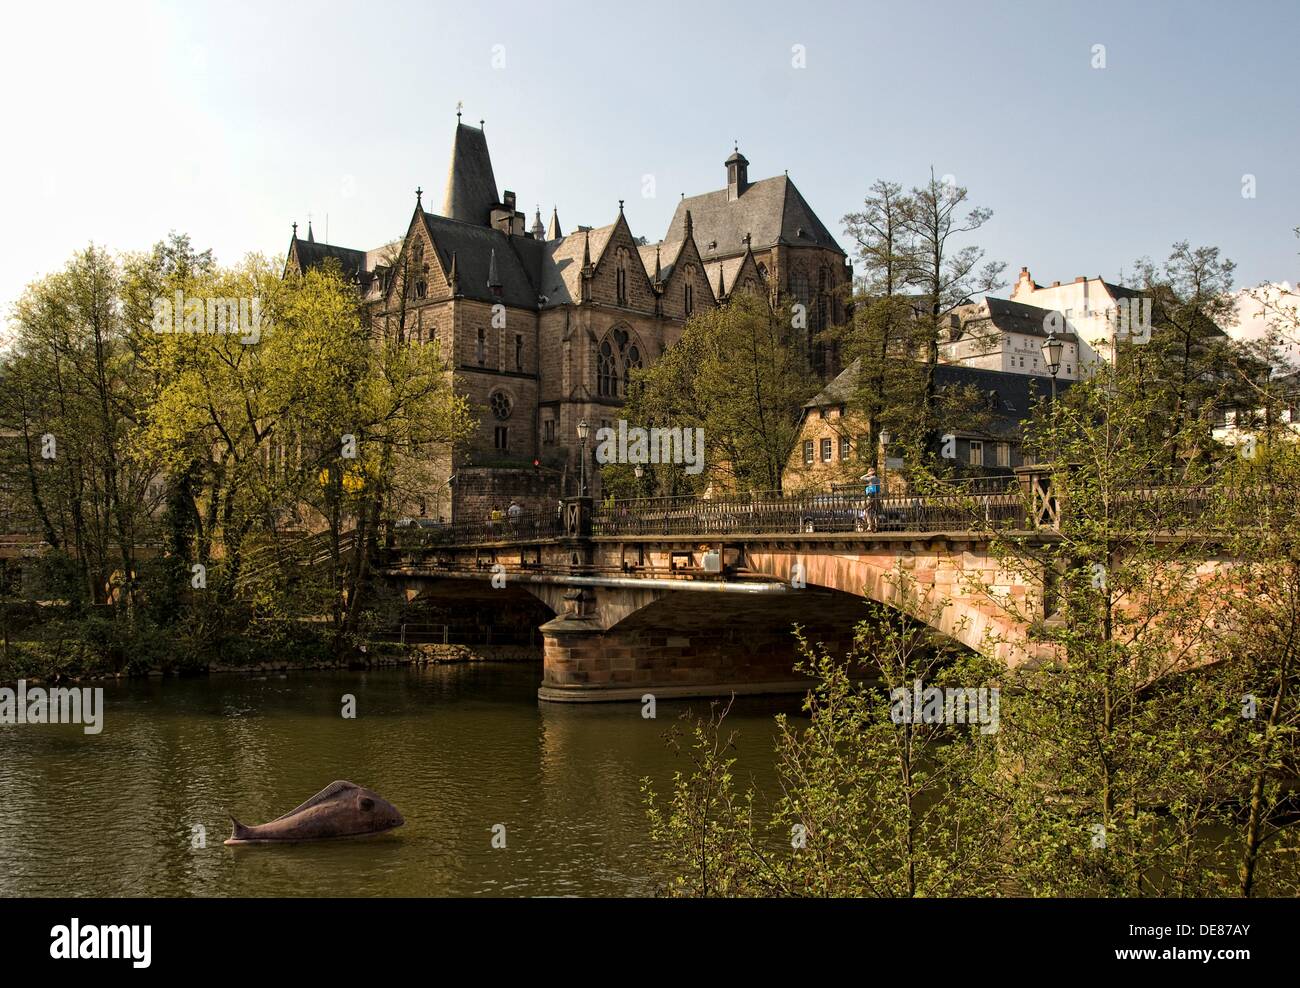 Philipps university of marburg hi-res stock photography and images - Alamy